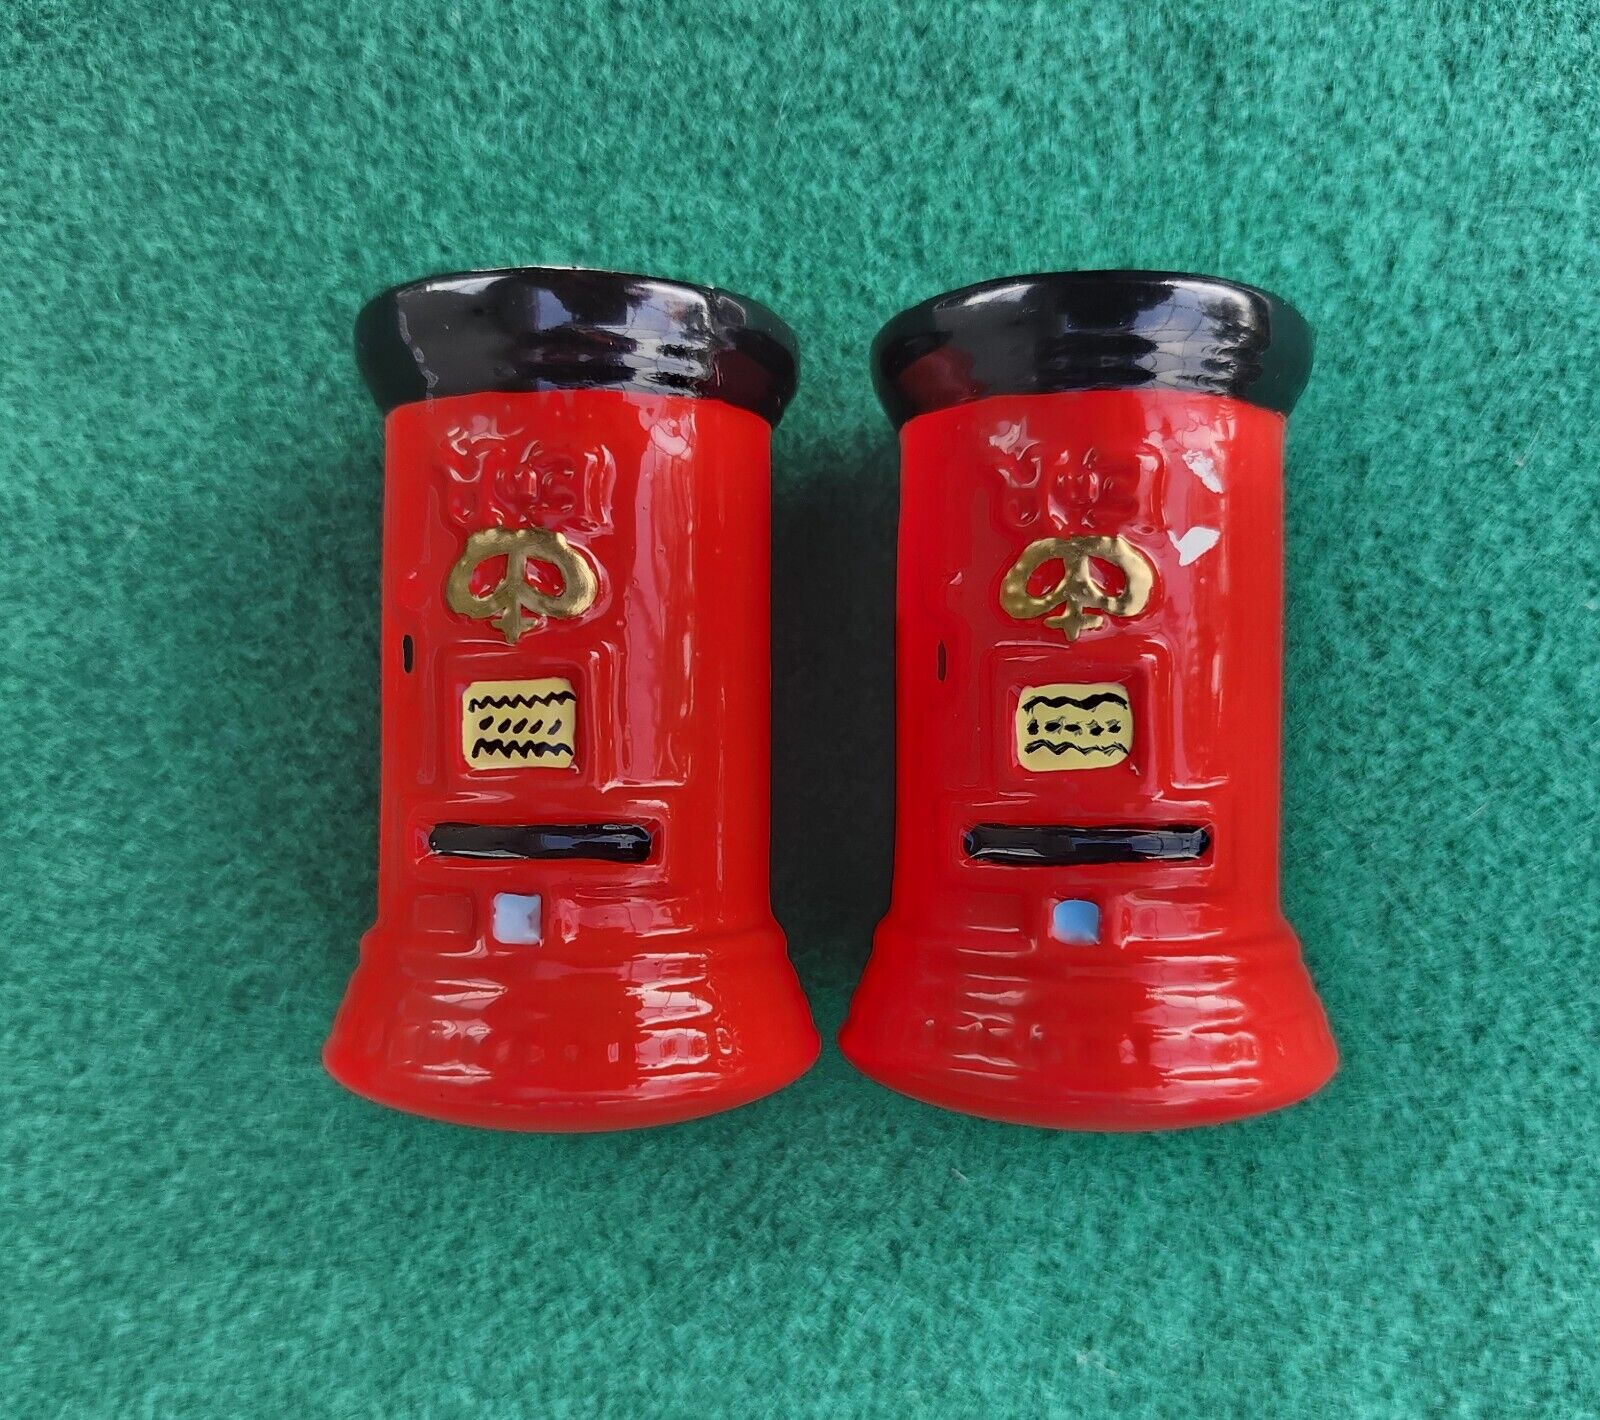 Vintage Royal Mail Boxes Salt And Pepper Shakers 